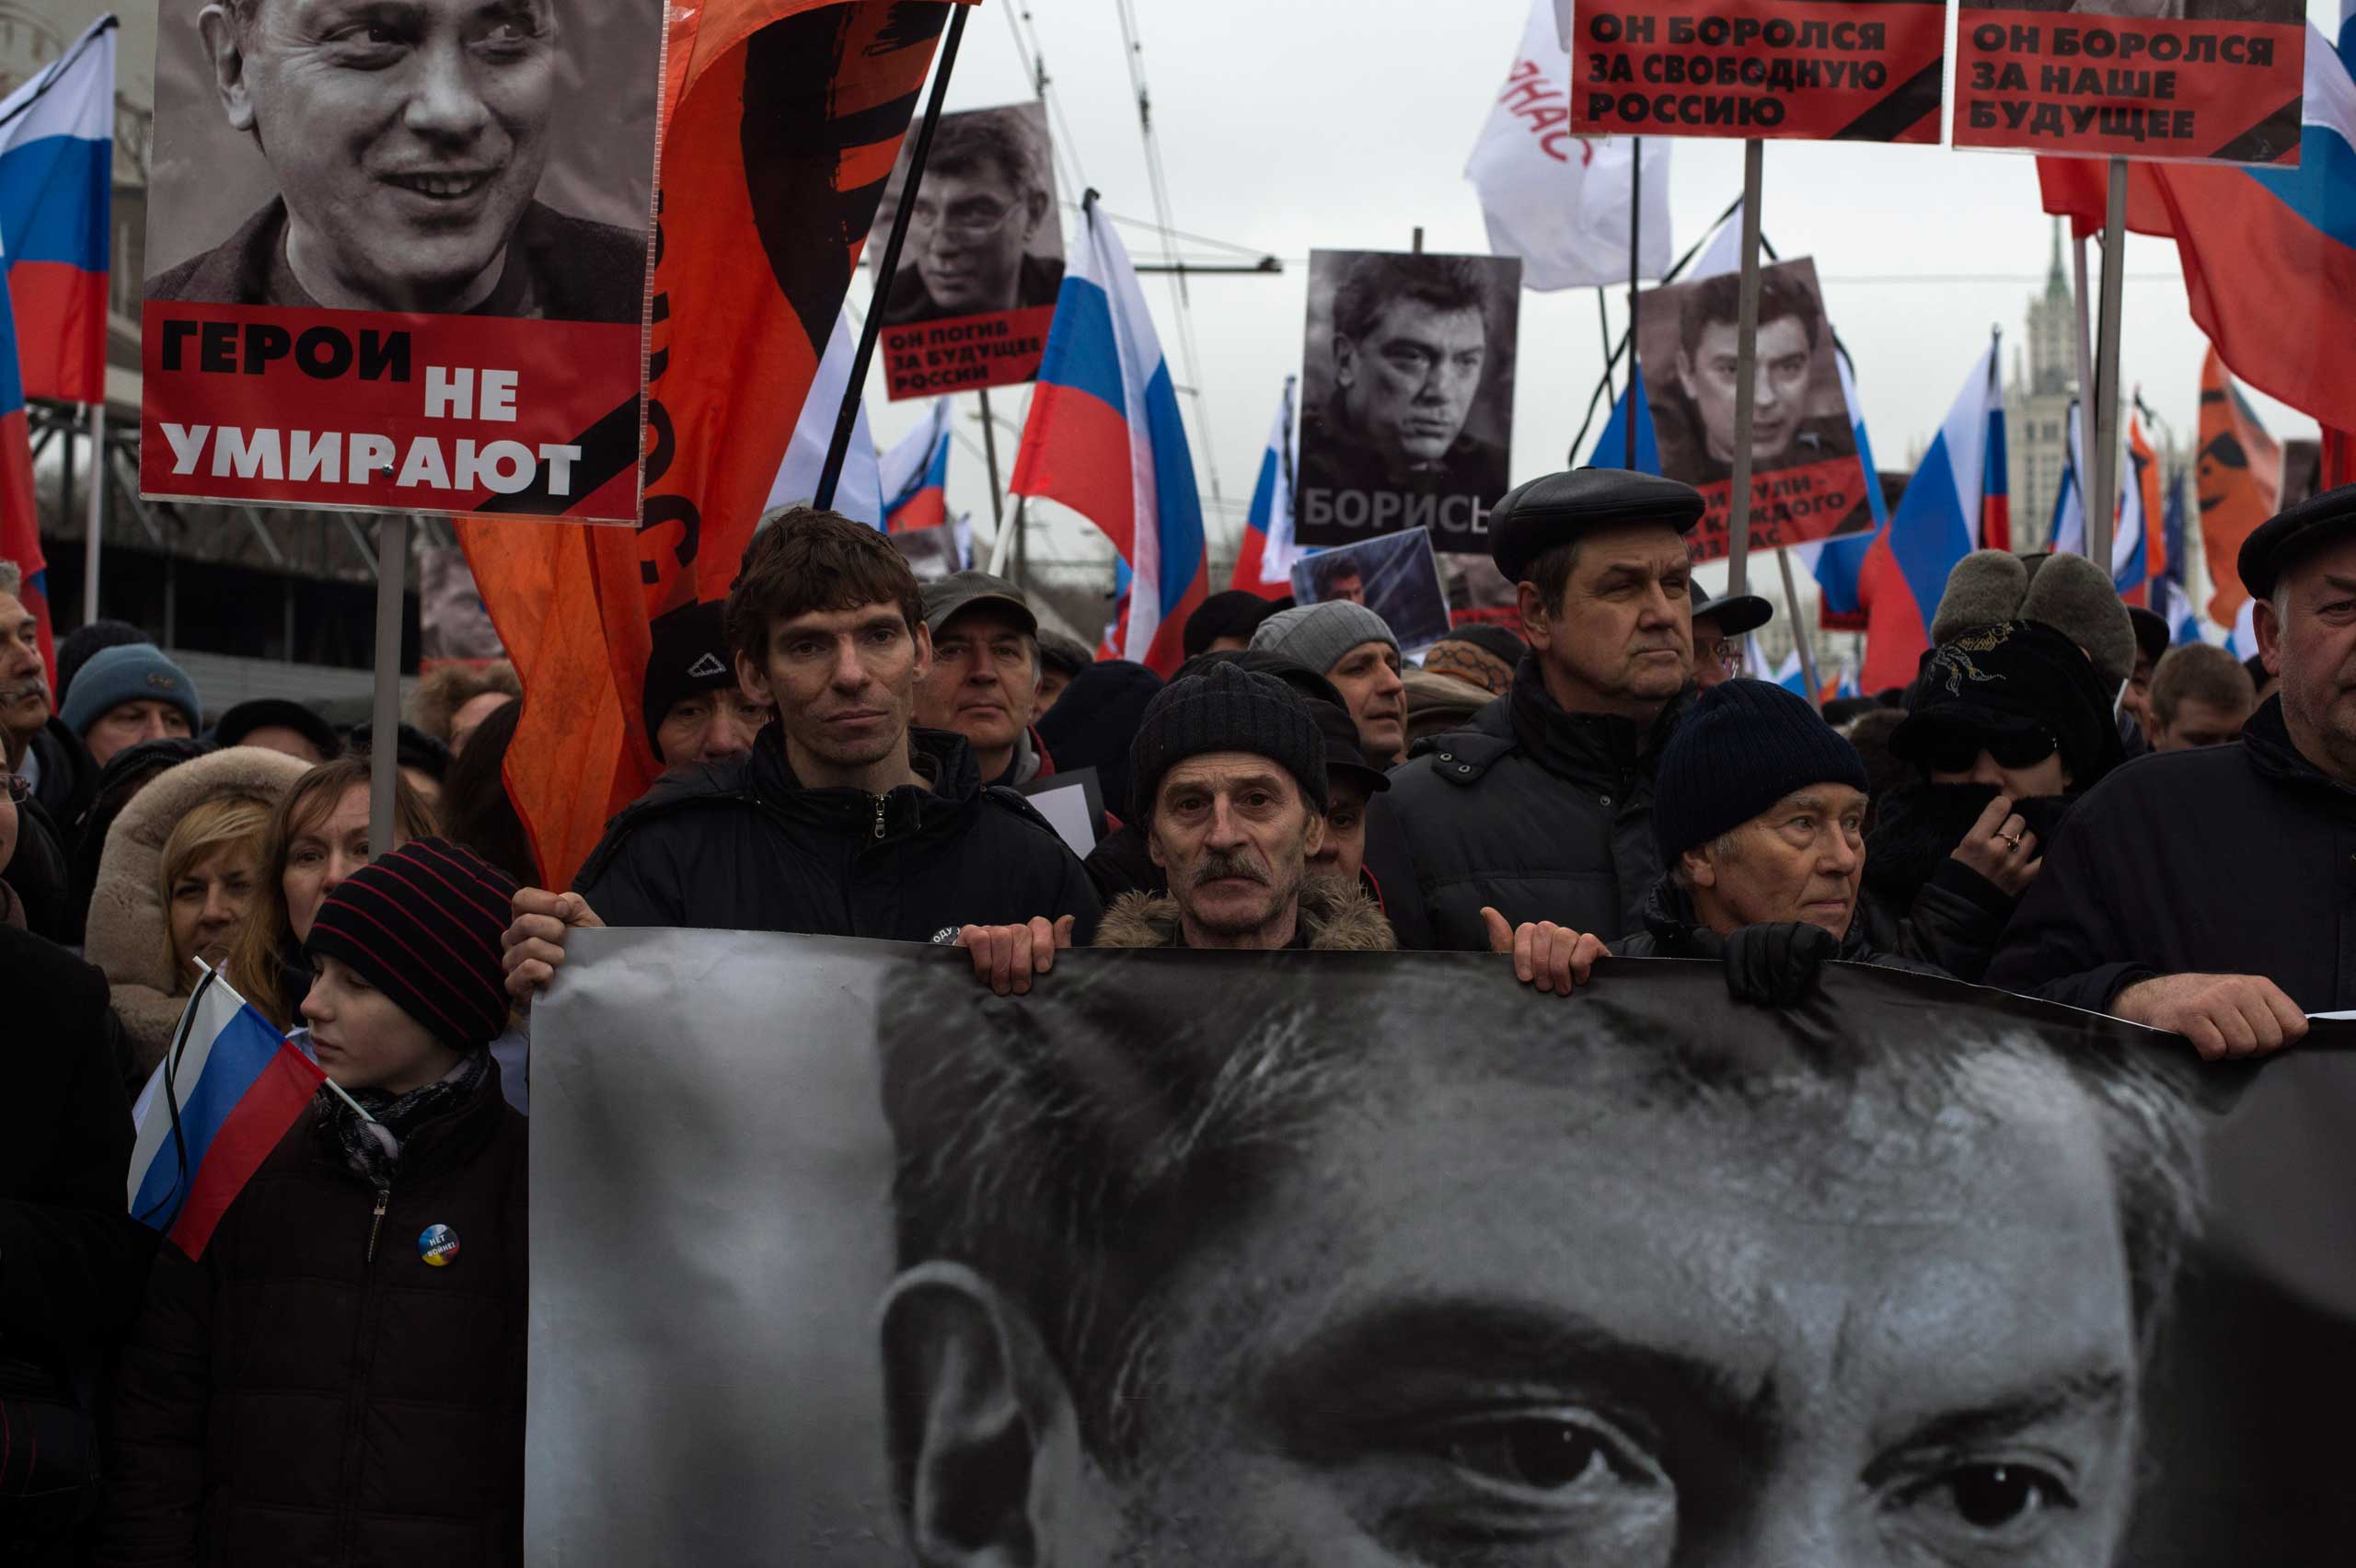 People march in memory of opposition leader Boris Nemtsov near the Kremlin in Moscow on March 1, 2015.